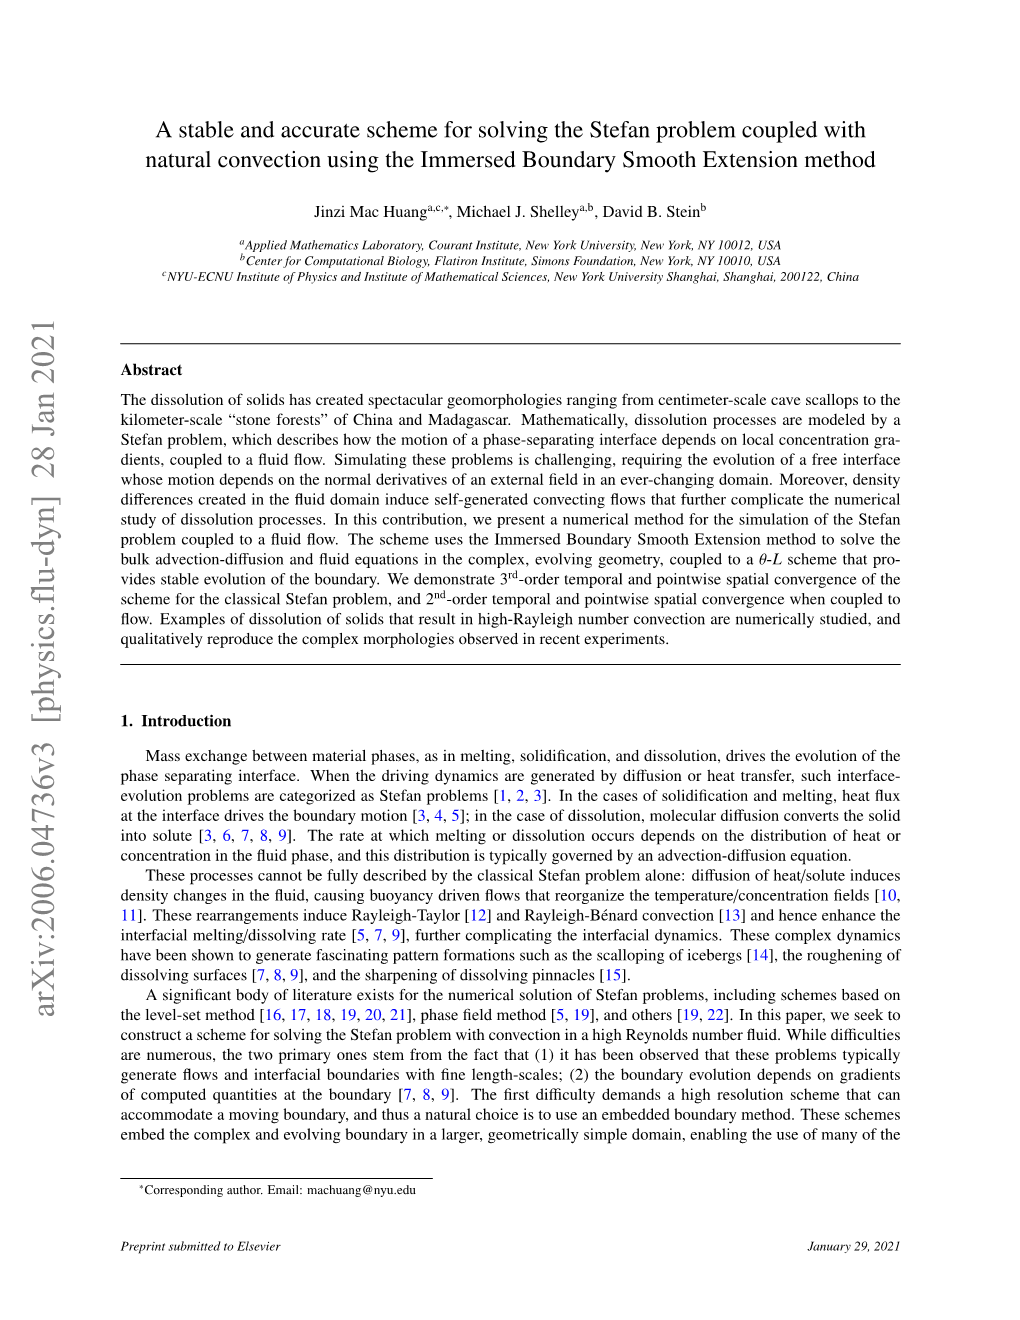 A Stable and Accurate Scheme for Solving the Stefan Problem Coupled with Natural Convection Using the Immersed Boundary Smooth Extension Method